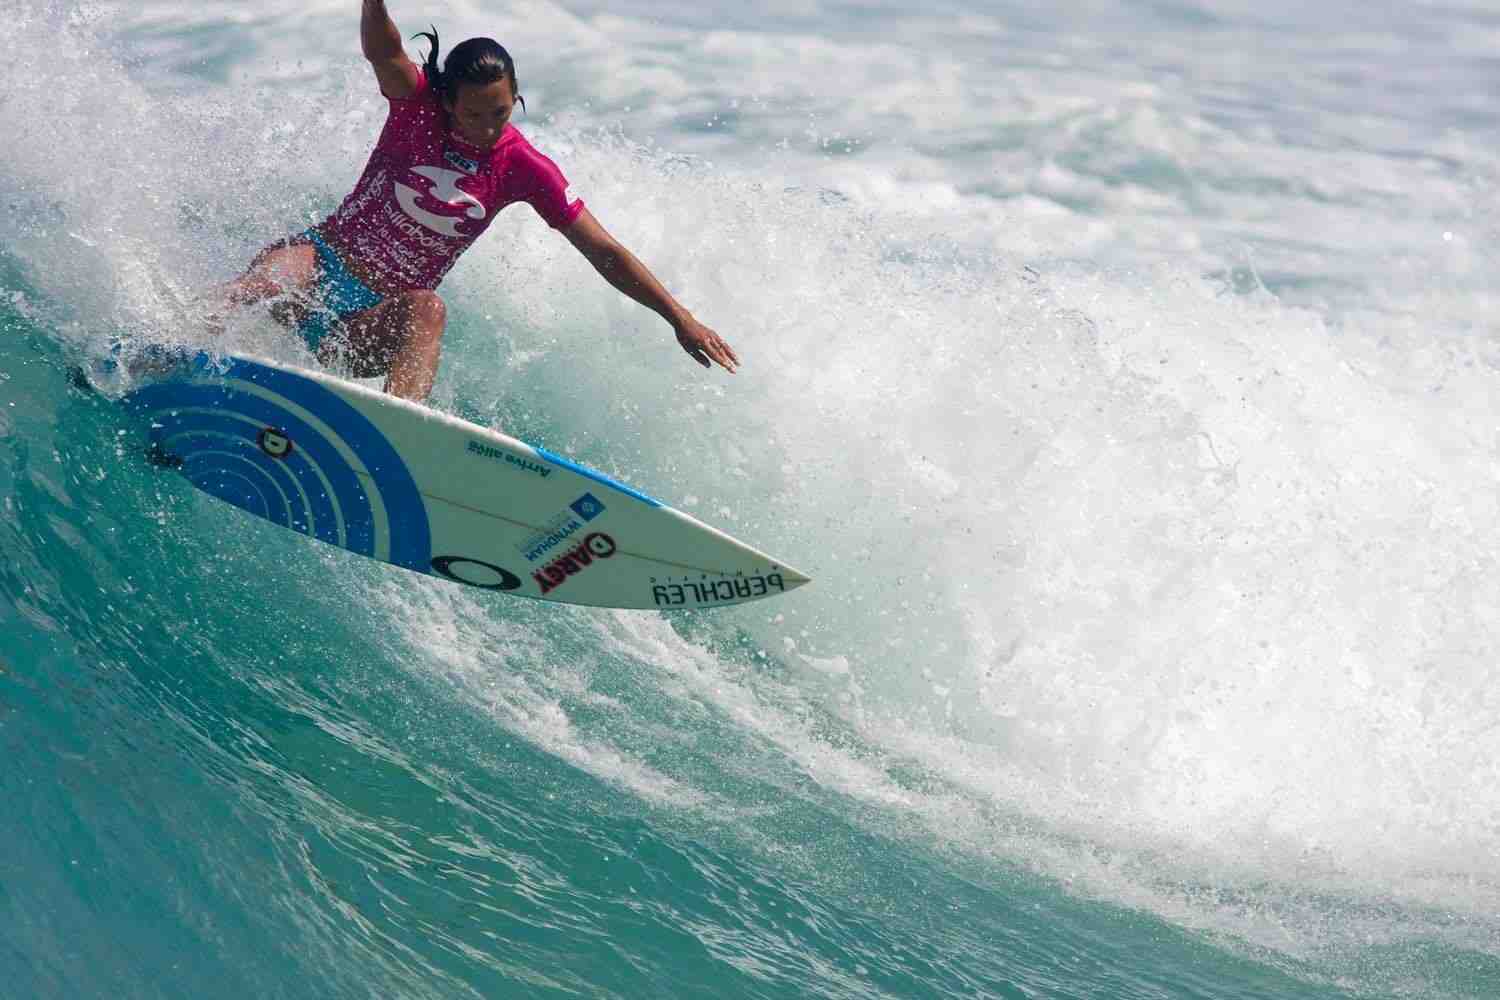 Which Australian surfer has won the most titles?